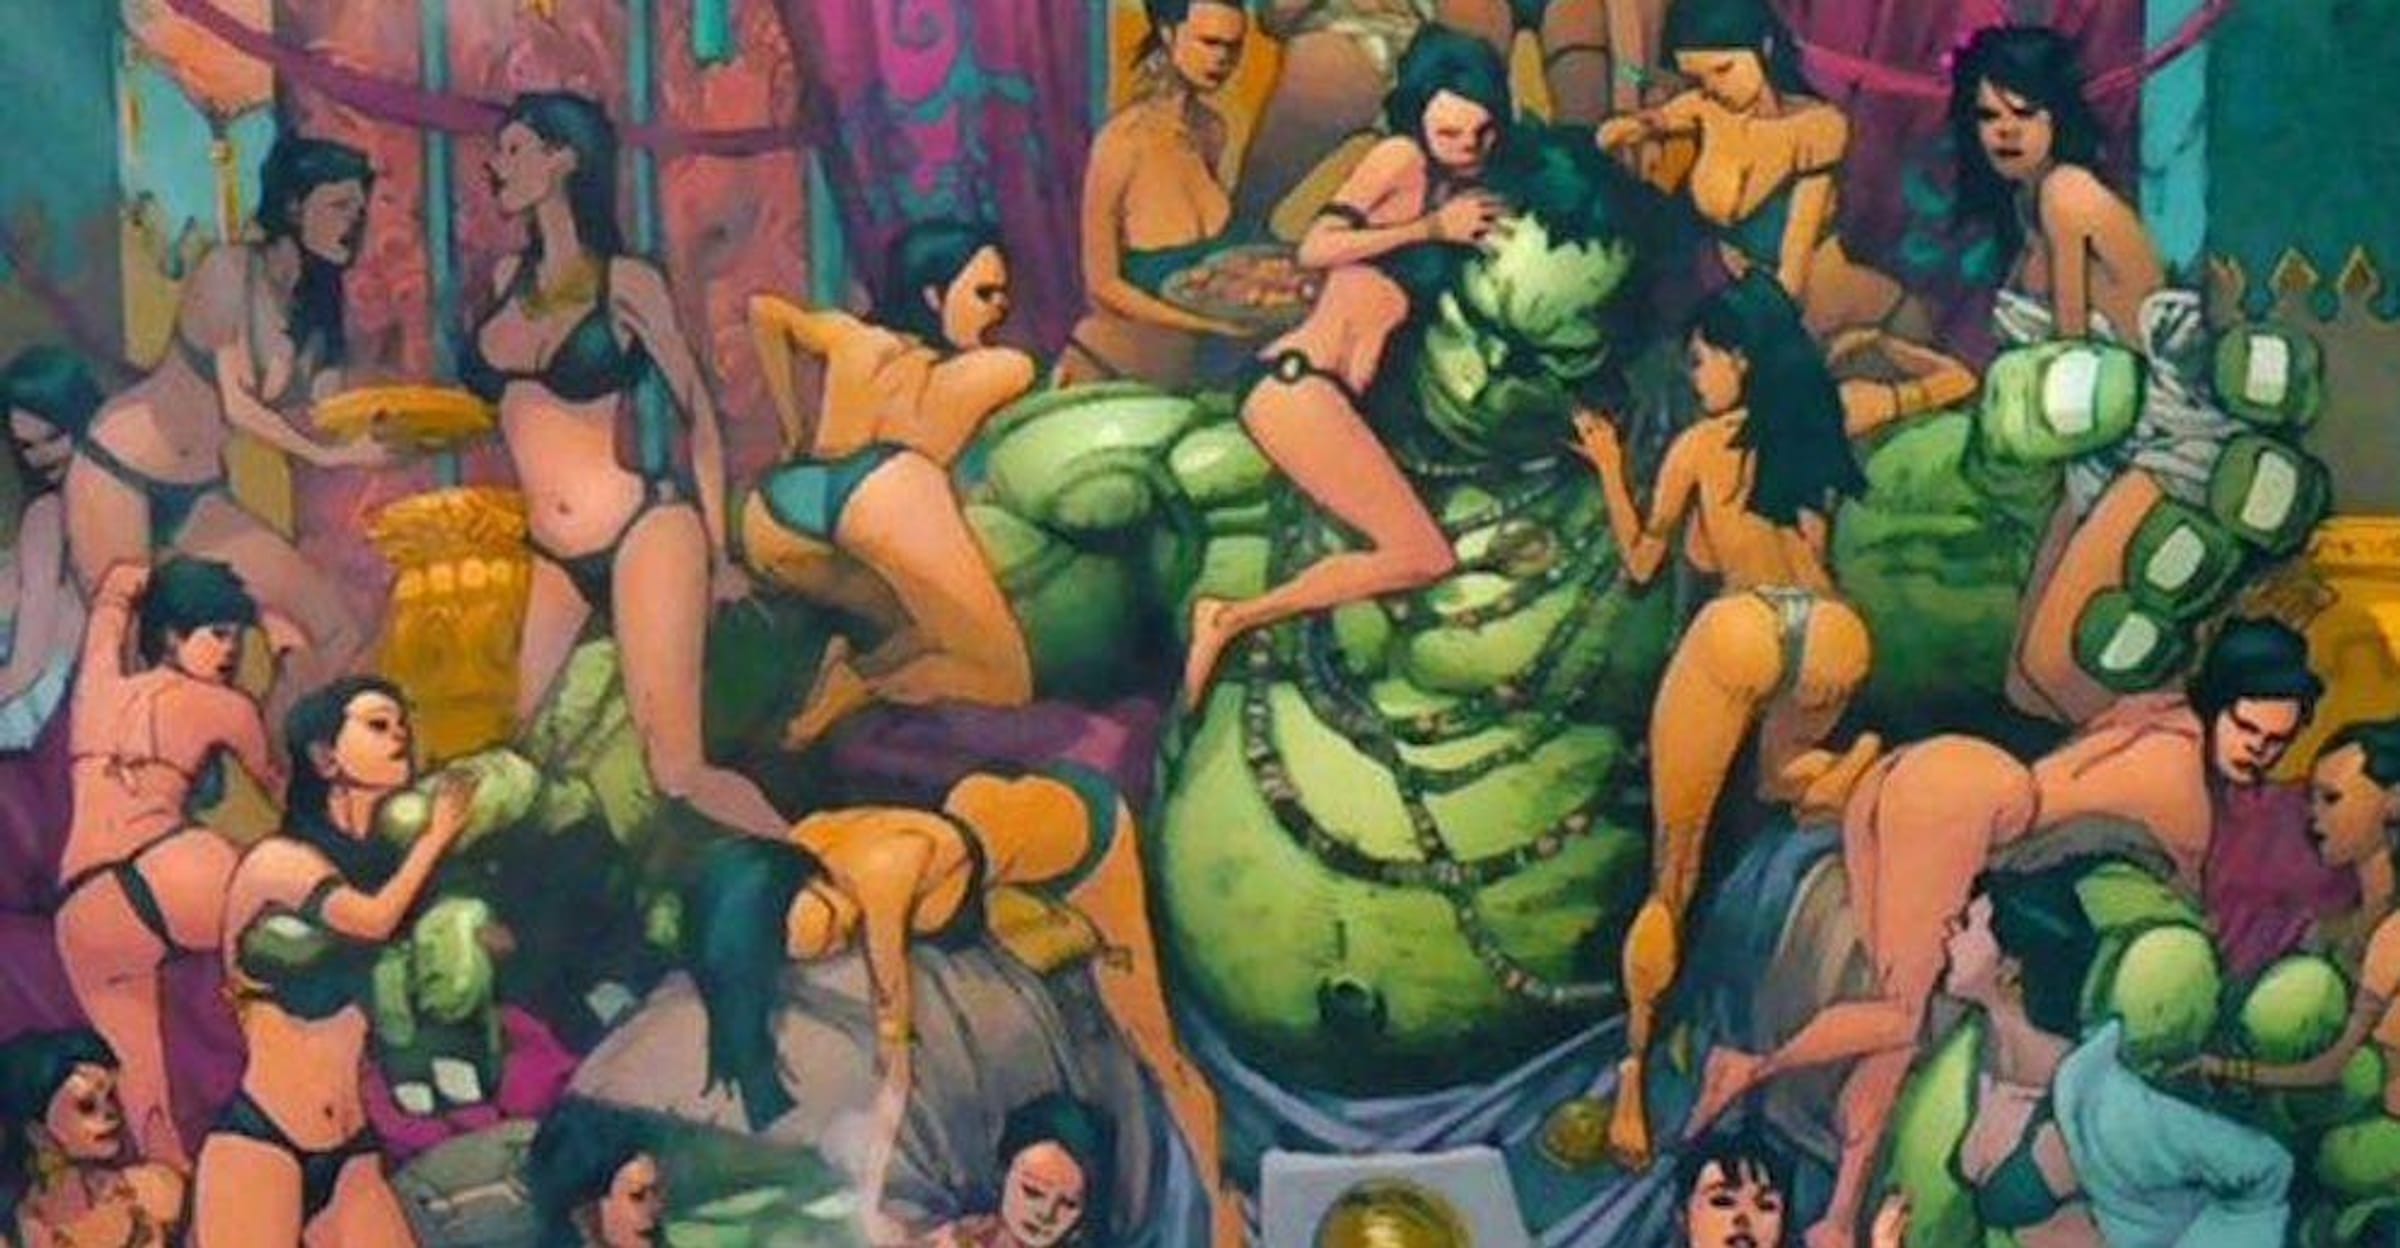 Freaky Japanese Porn Comics - The 17 Most Sexually Deviant Superheroes In Comics